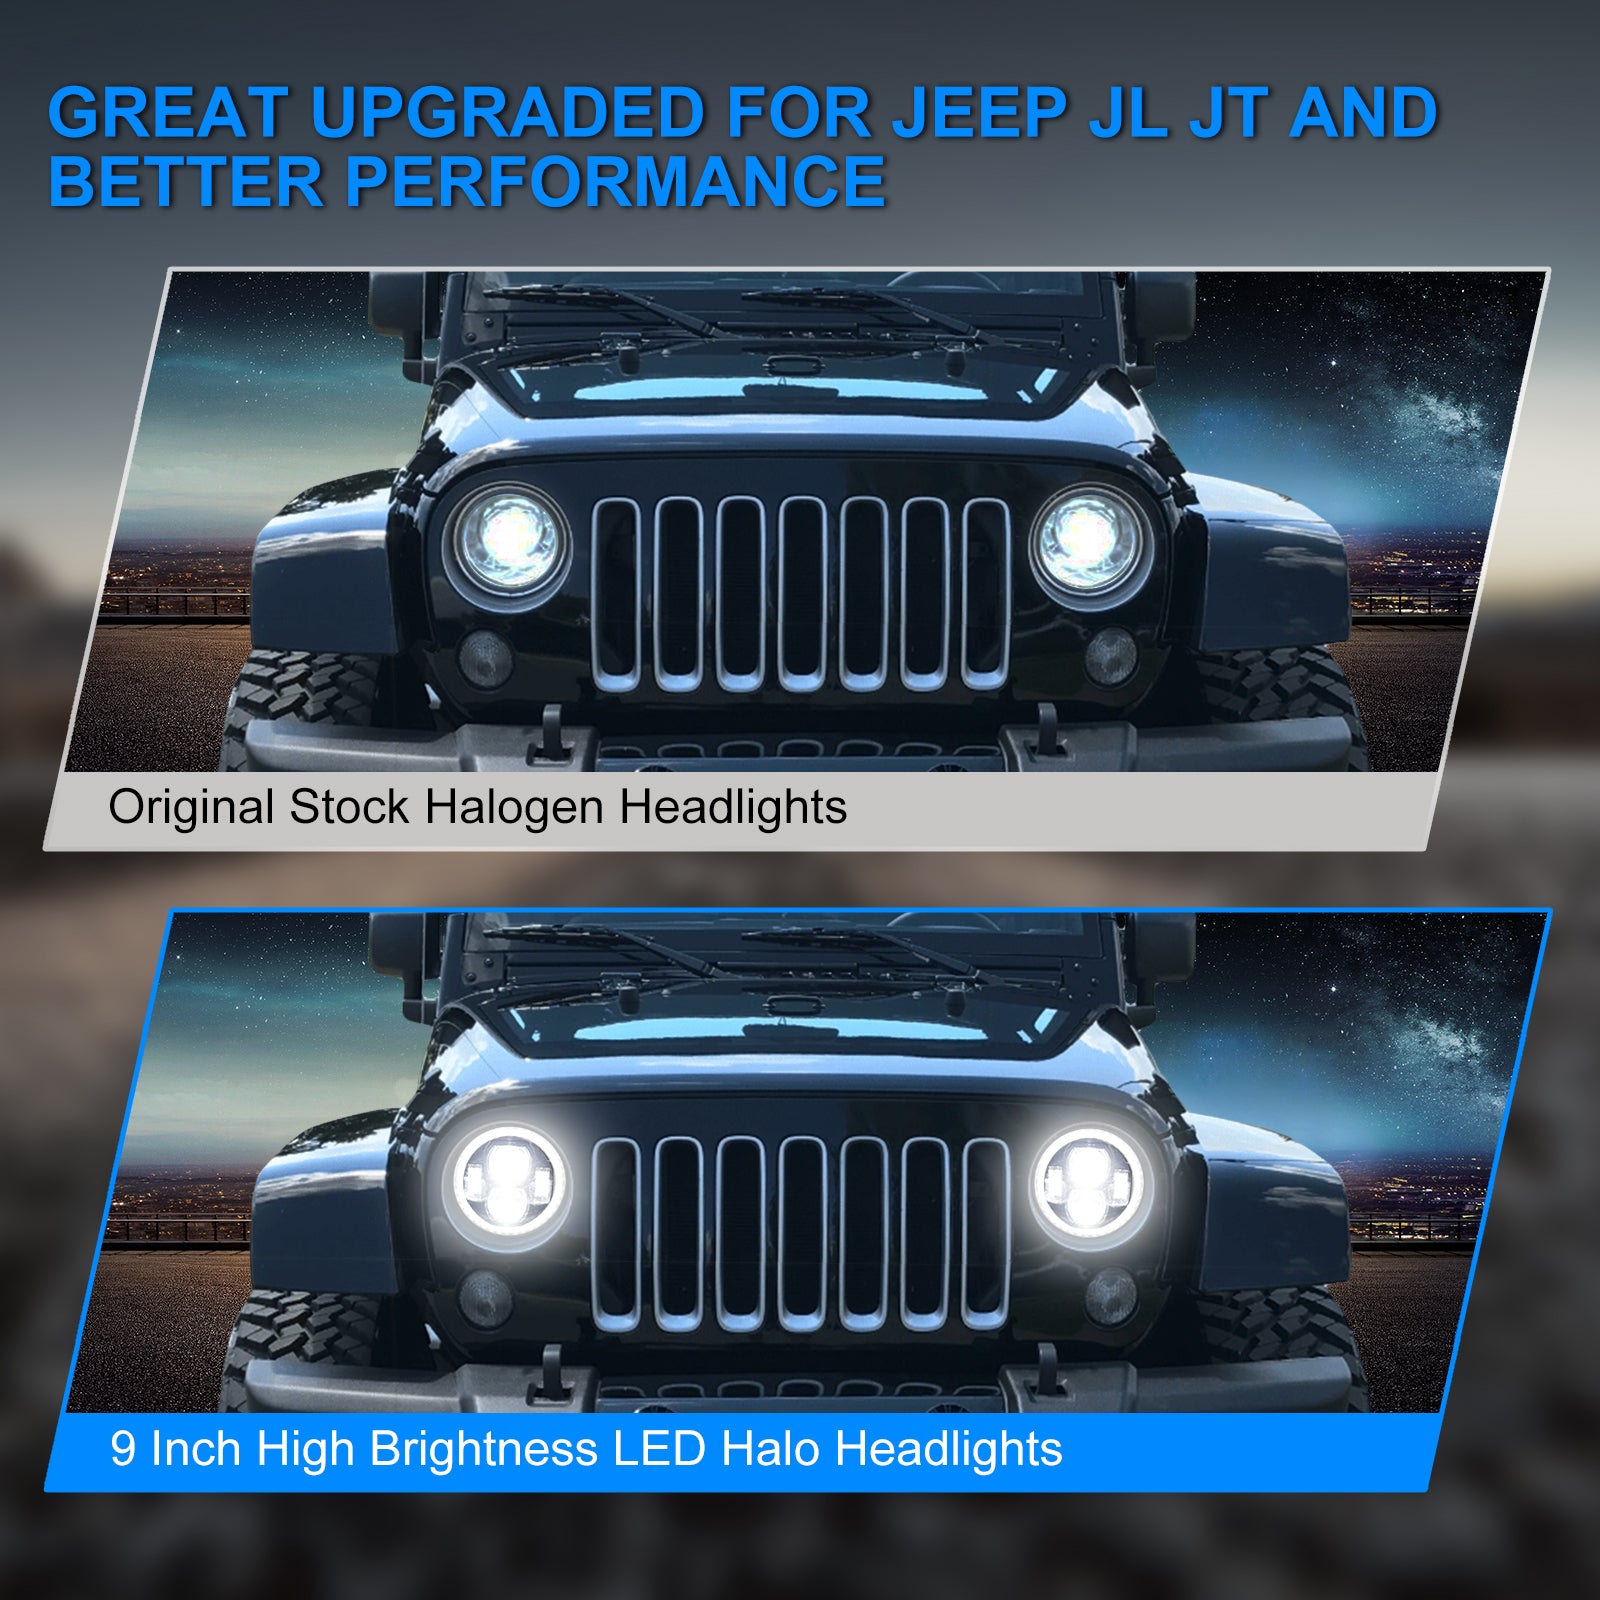 9" Halo LED Headlights With DRL & Amber Turn Signals & LED Halo Fog Lights For 2018+ Jeep Wrangler JL And Gladiator JT